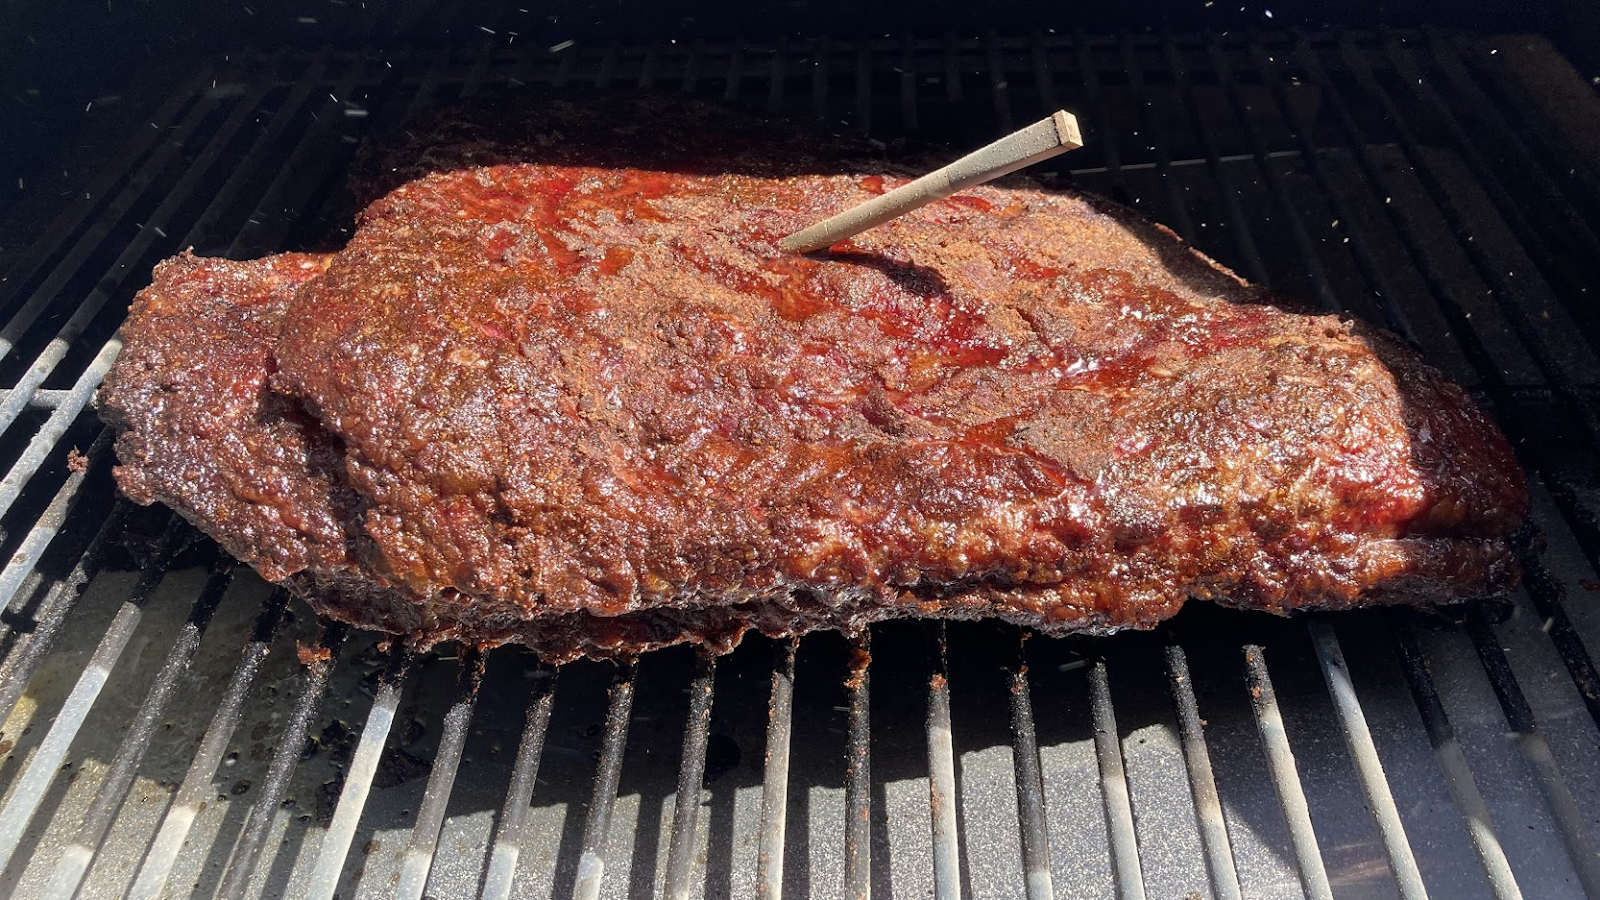 Brisket - ready to come off the grill. Griller's Gold Blog